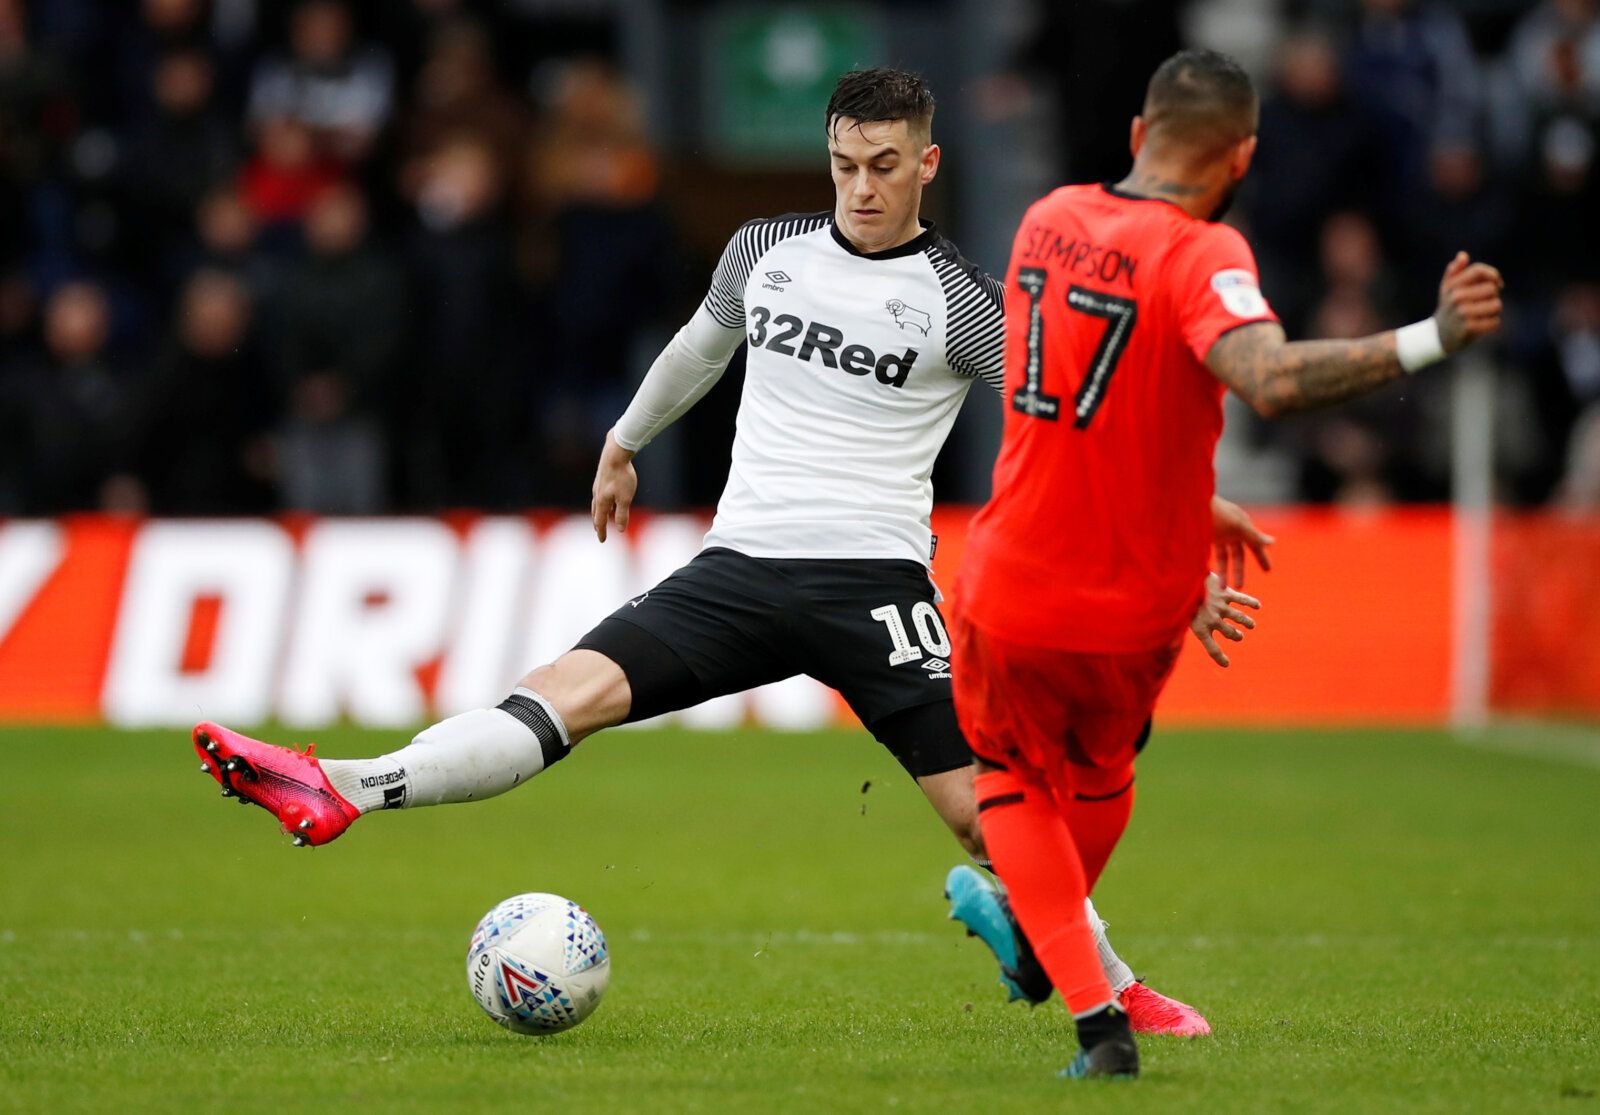 Soccer Football - Championship - Derby County v Huddersfield Town - Pride Park, Derby, Britain - February 15, 2020   Derby County's Tom Lawrence in action with Huddersfield Town's Danny Simpson   Action Images/Andrew Boyers    EDITORIAL USE ONLY. No use with unauthorized audio, video, data, fixture lists, club/league logos or 